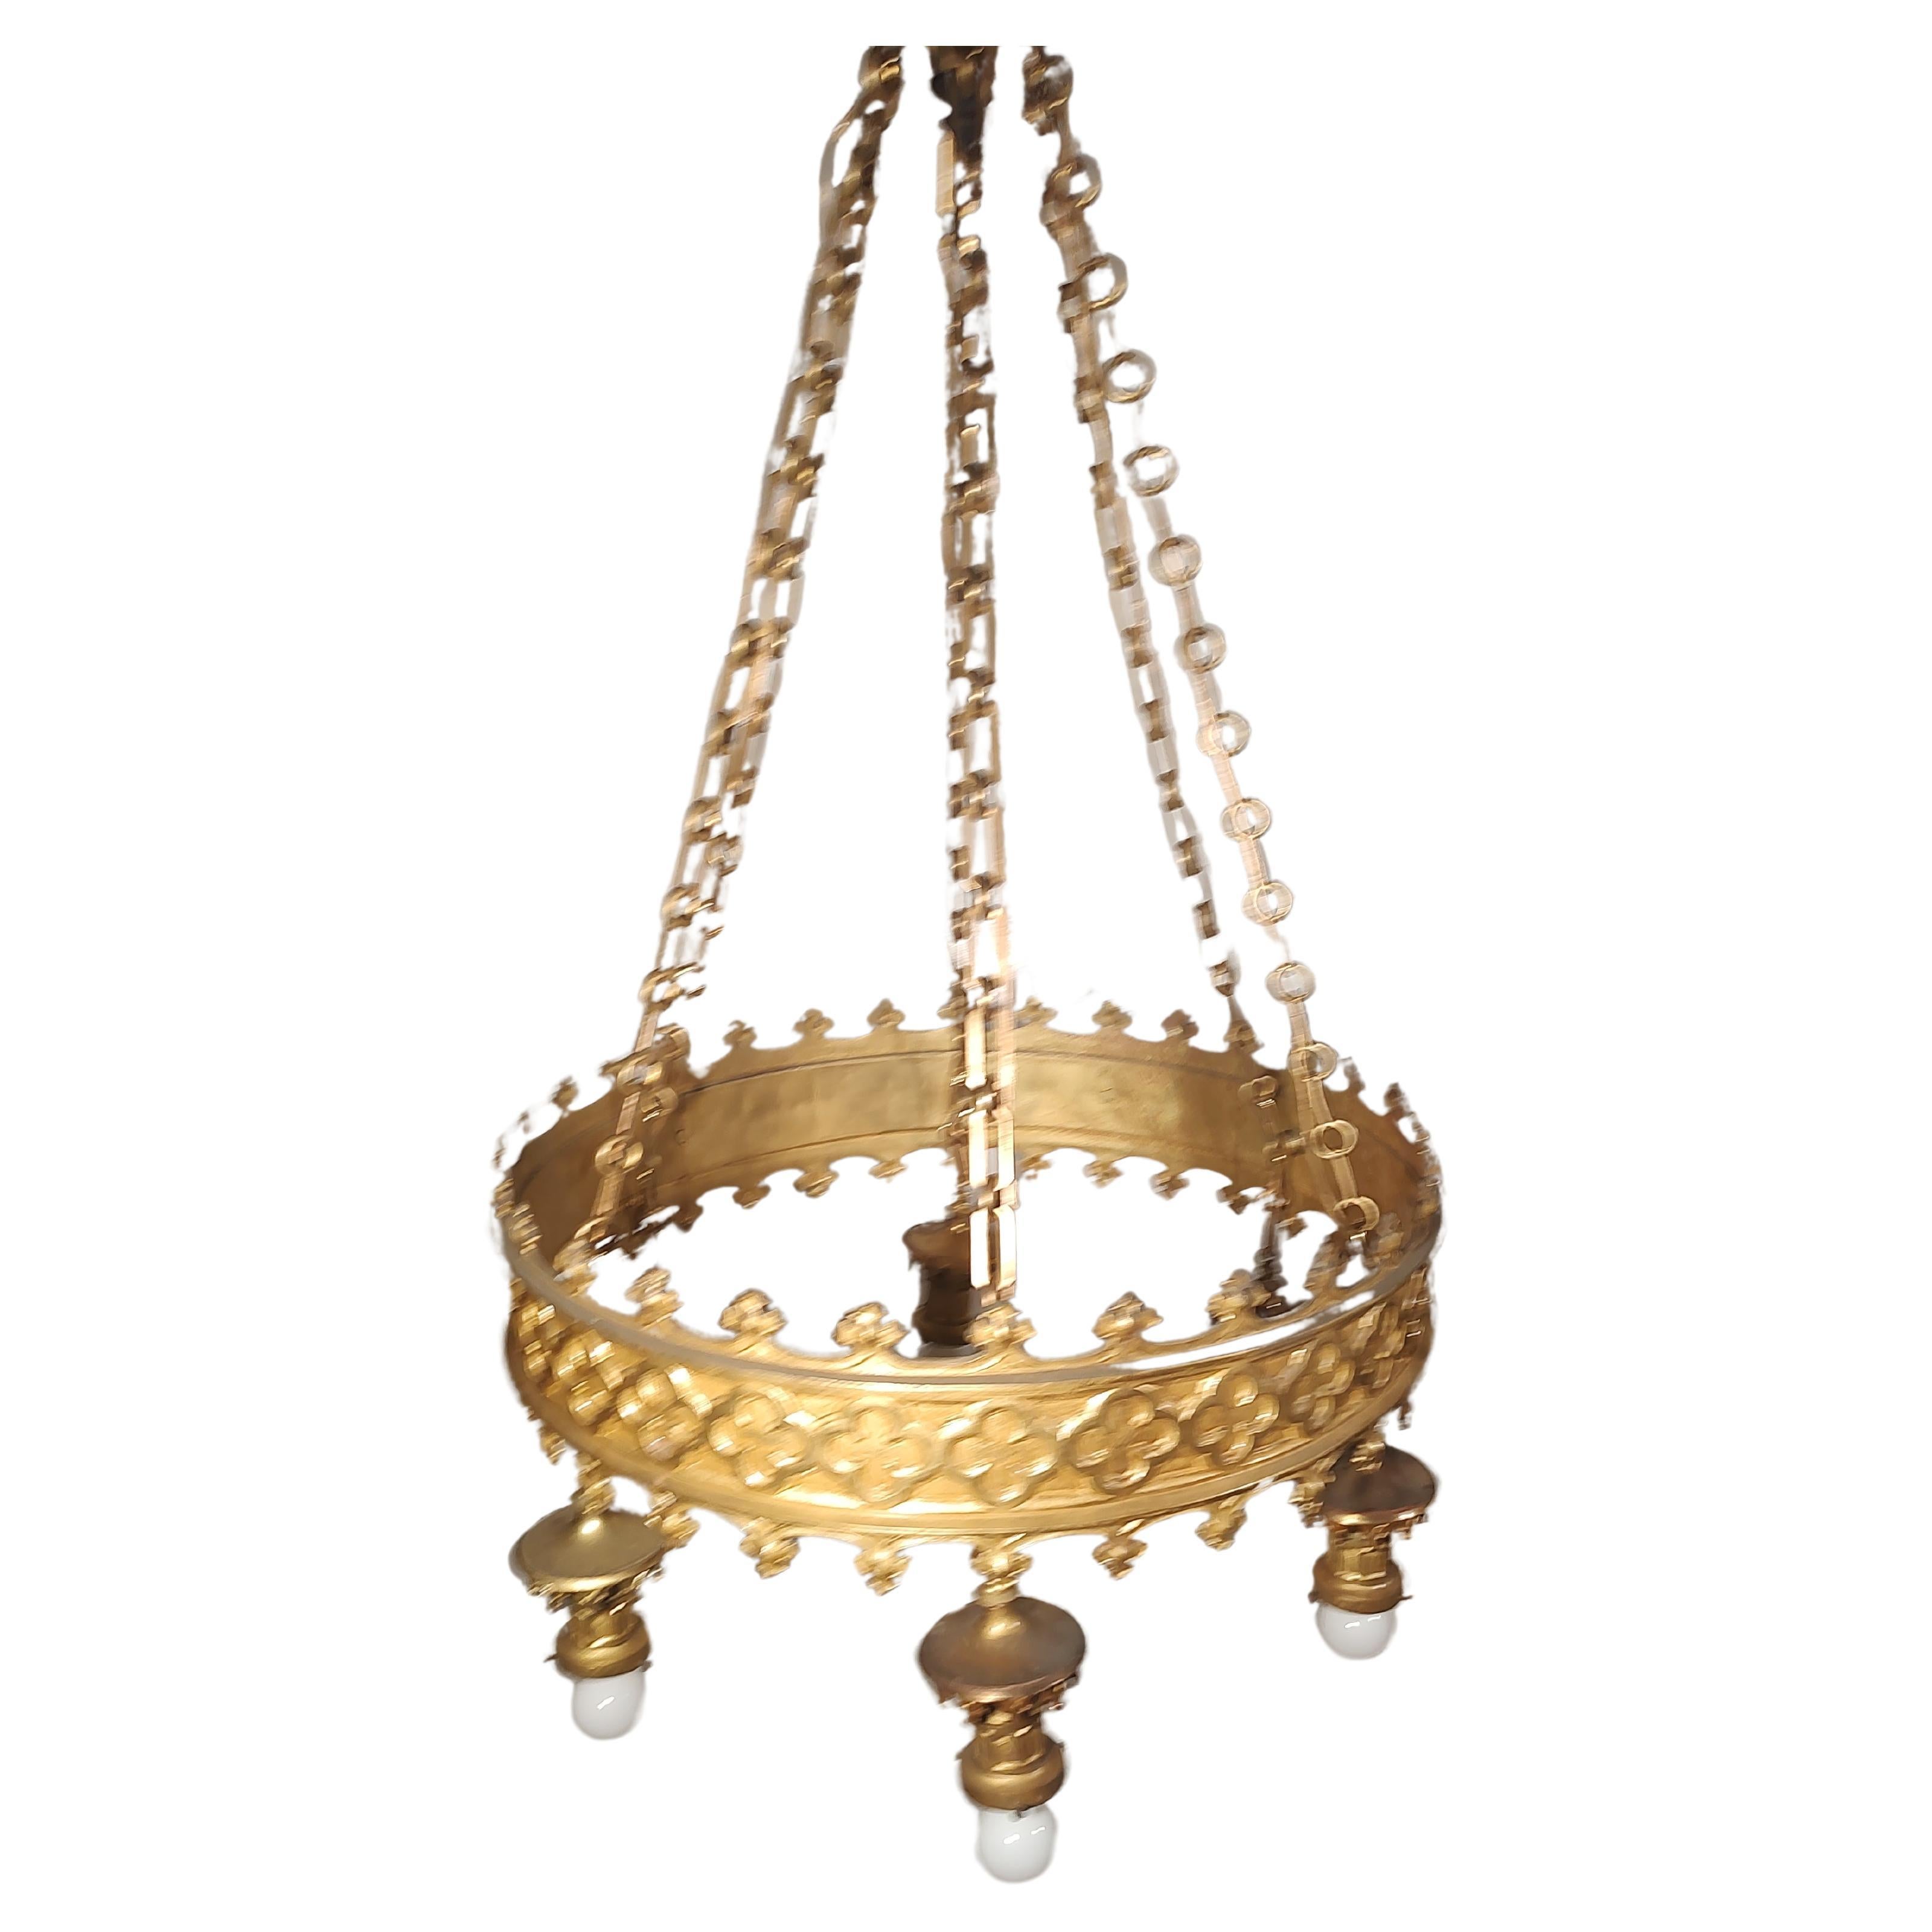 Arts & Crafts Art Deco Gilt Brass 6 Light Large Chandelier from a NJ Theatre  For Sale 1